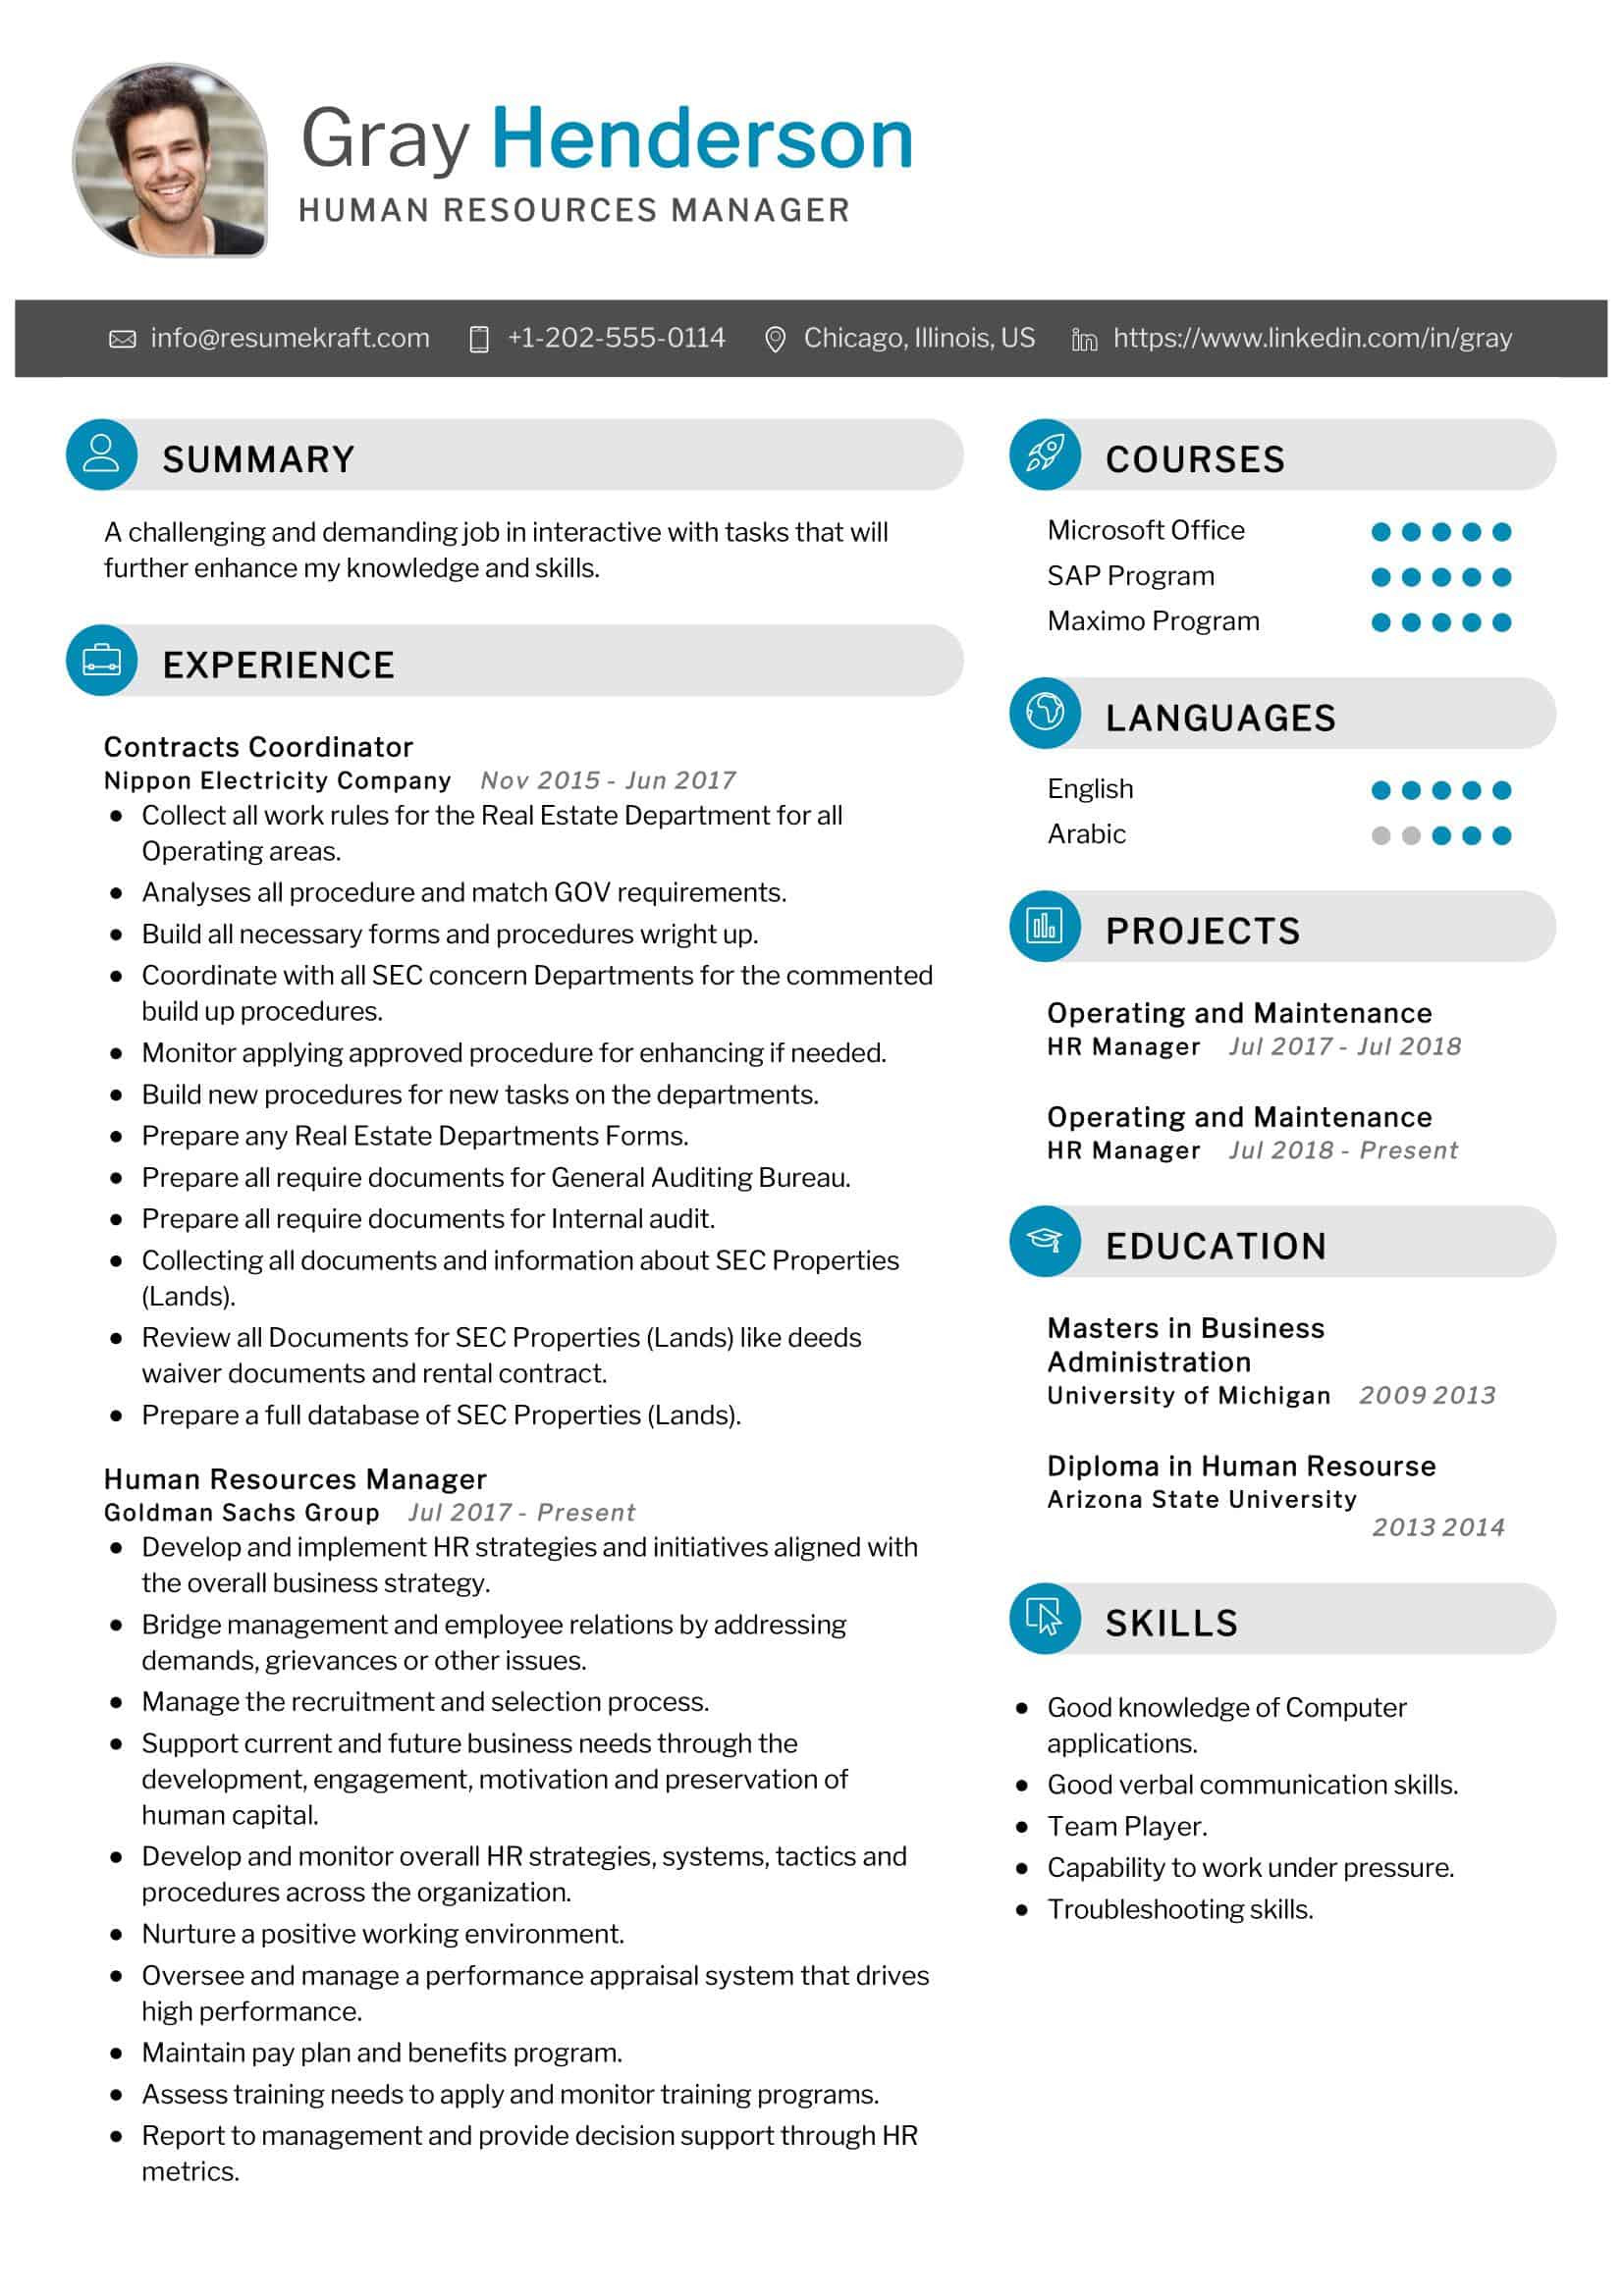 Free Sample Resume for Human Resources Manager Human Resources Manager Resume 2022 Writing Tips – Resumekraft